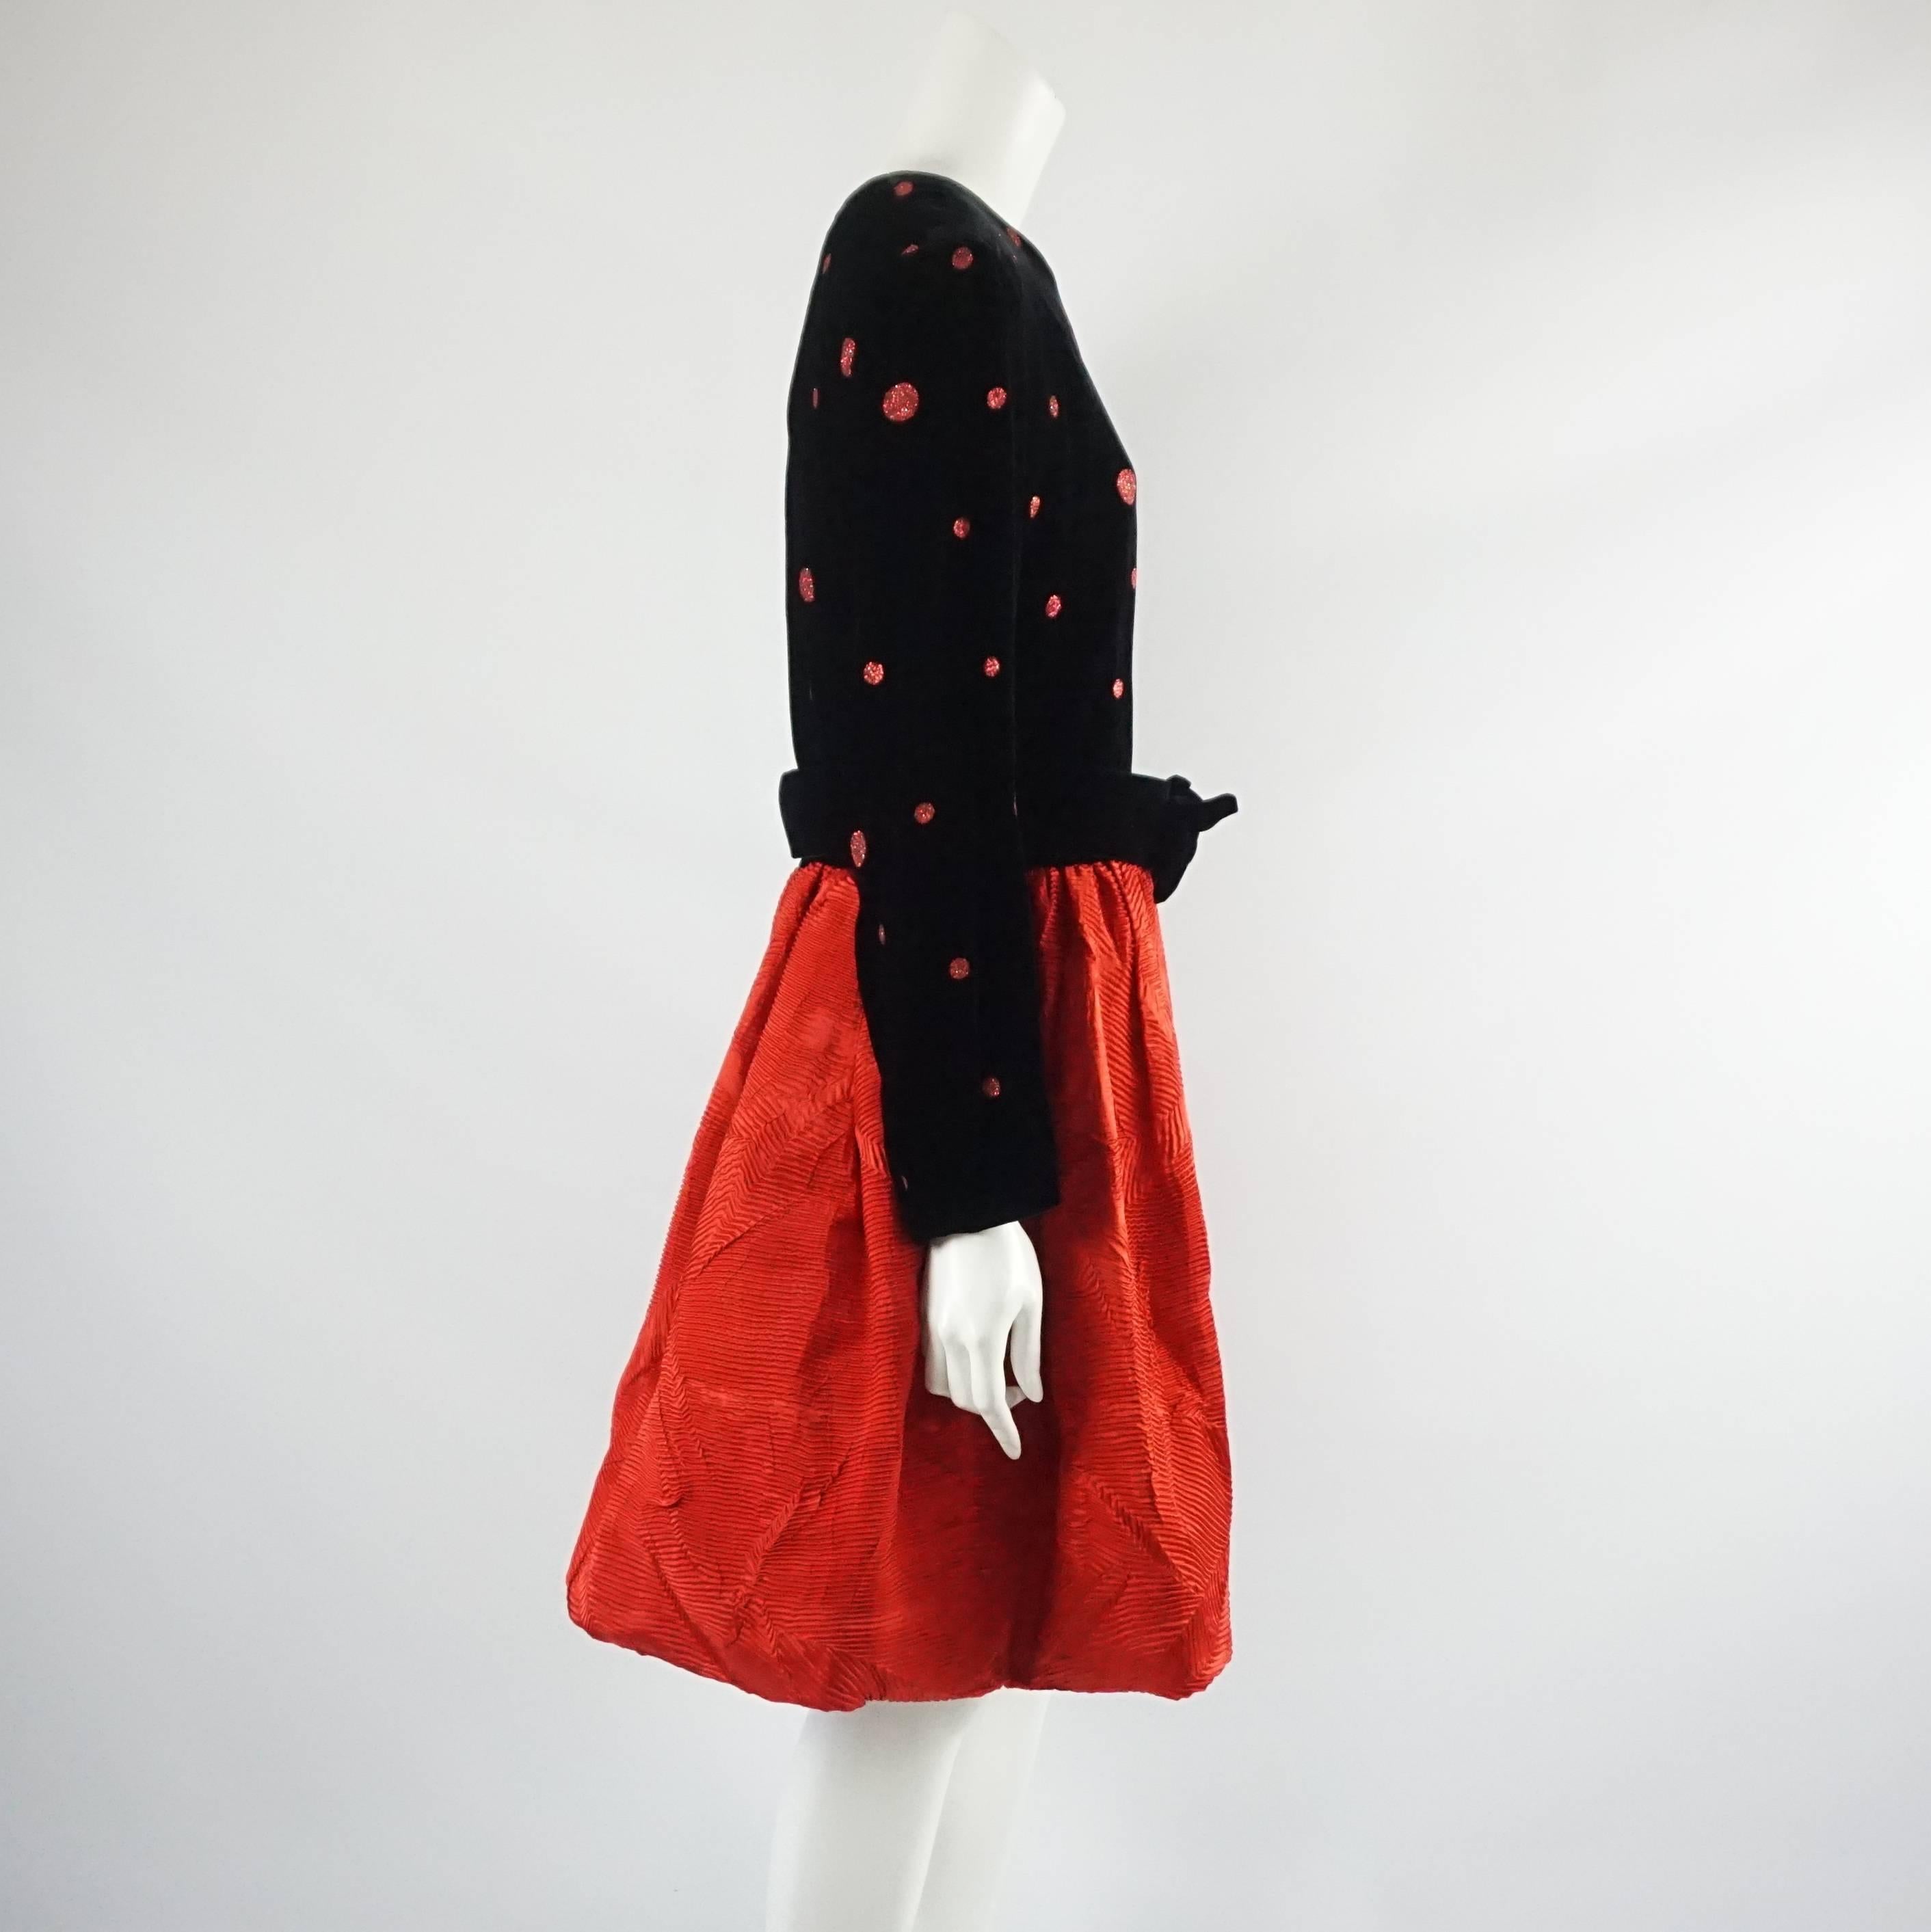 Escada Margaretha Ley Black and Red Velvet Polka Dot Dress-42. This elegant dress by Escada Margaretha Ley is in great condition. It shows barely any sign of use. This dress has a black velvet long sleeve top with red sparkly polka dots and a red